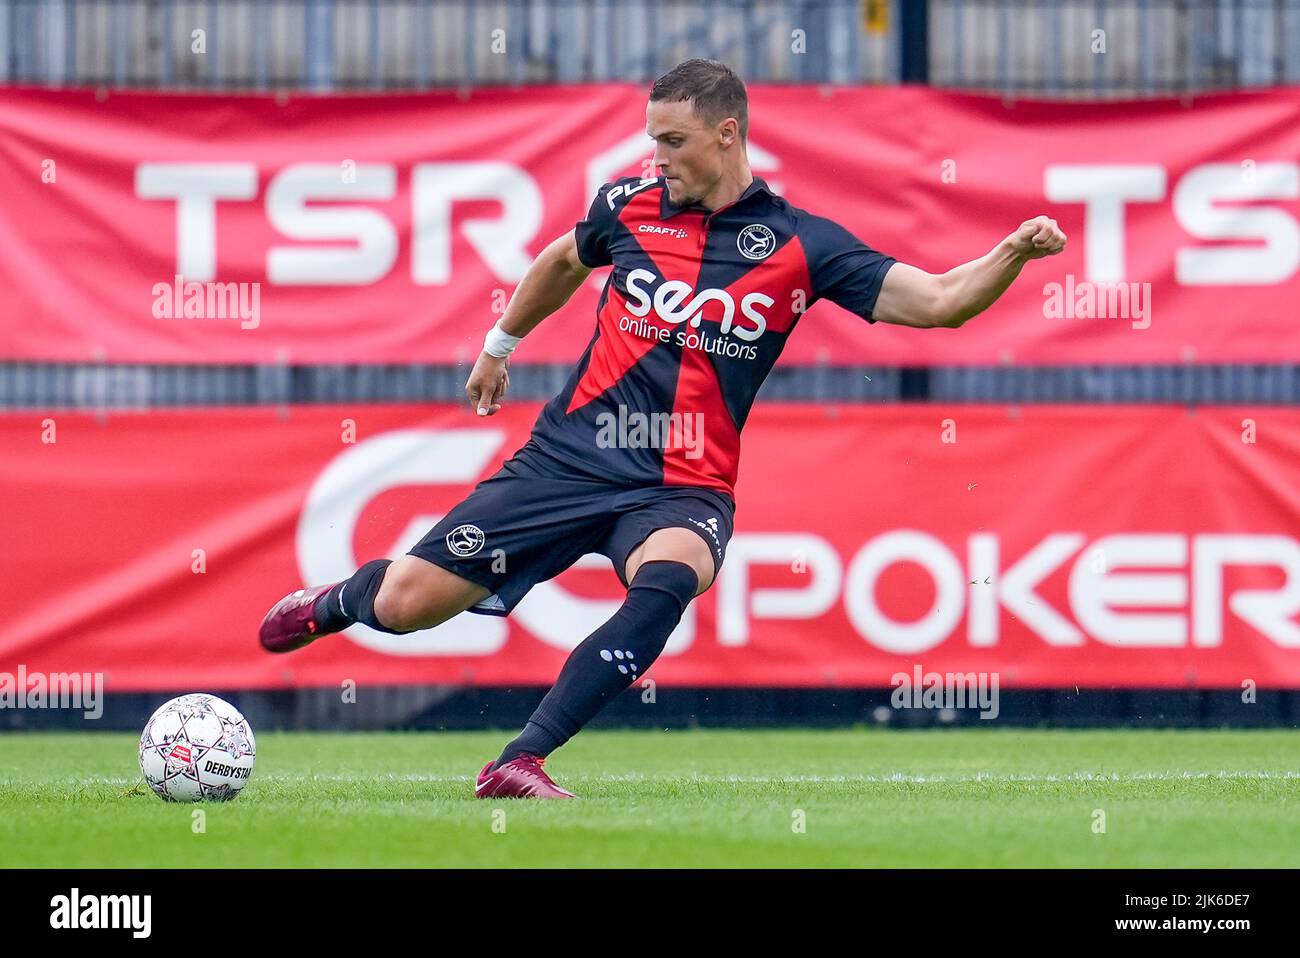 ALMERE, NETHERLANDS - JULY 31: Damian van Bruggen of Almere City FC during  the Preseason Friendly match between Almere City FC and Ajax at Yanmar  Stadion on July 31, 2022 in Almere,